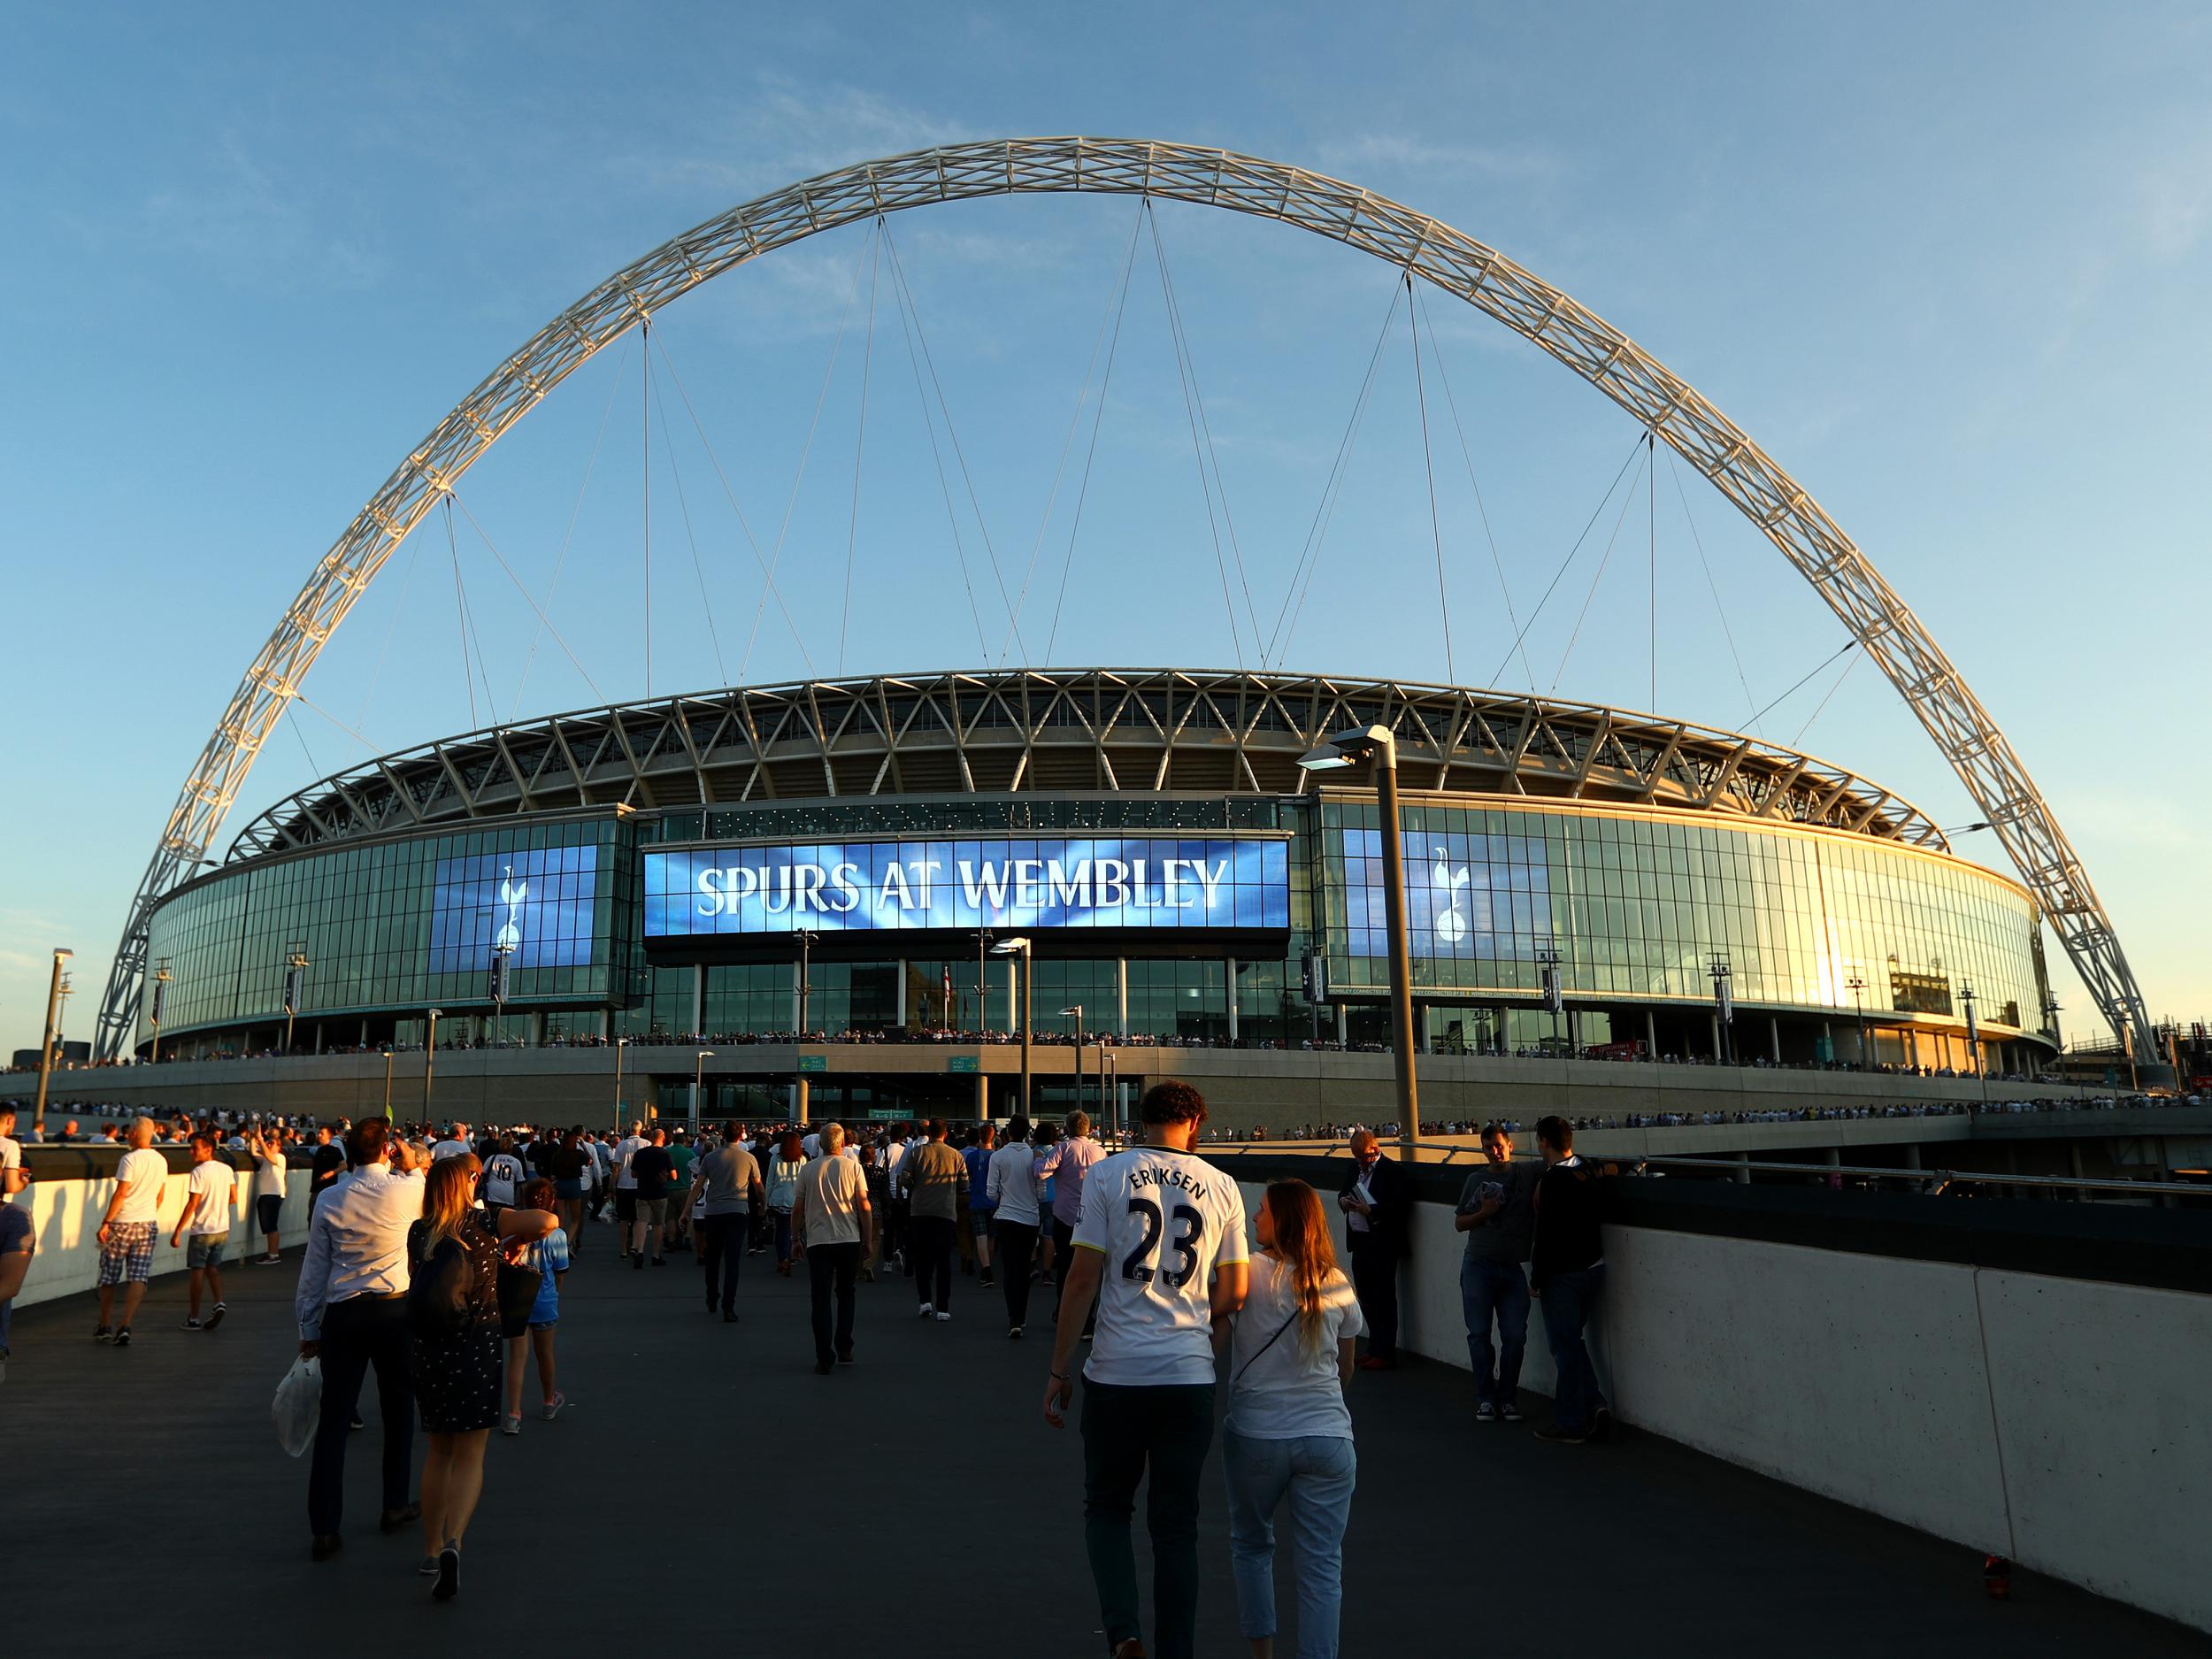 Spurs have a poor record at Wembley